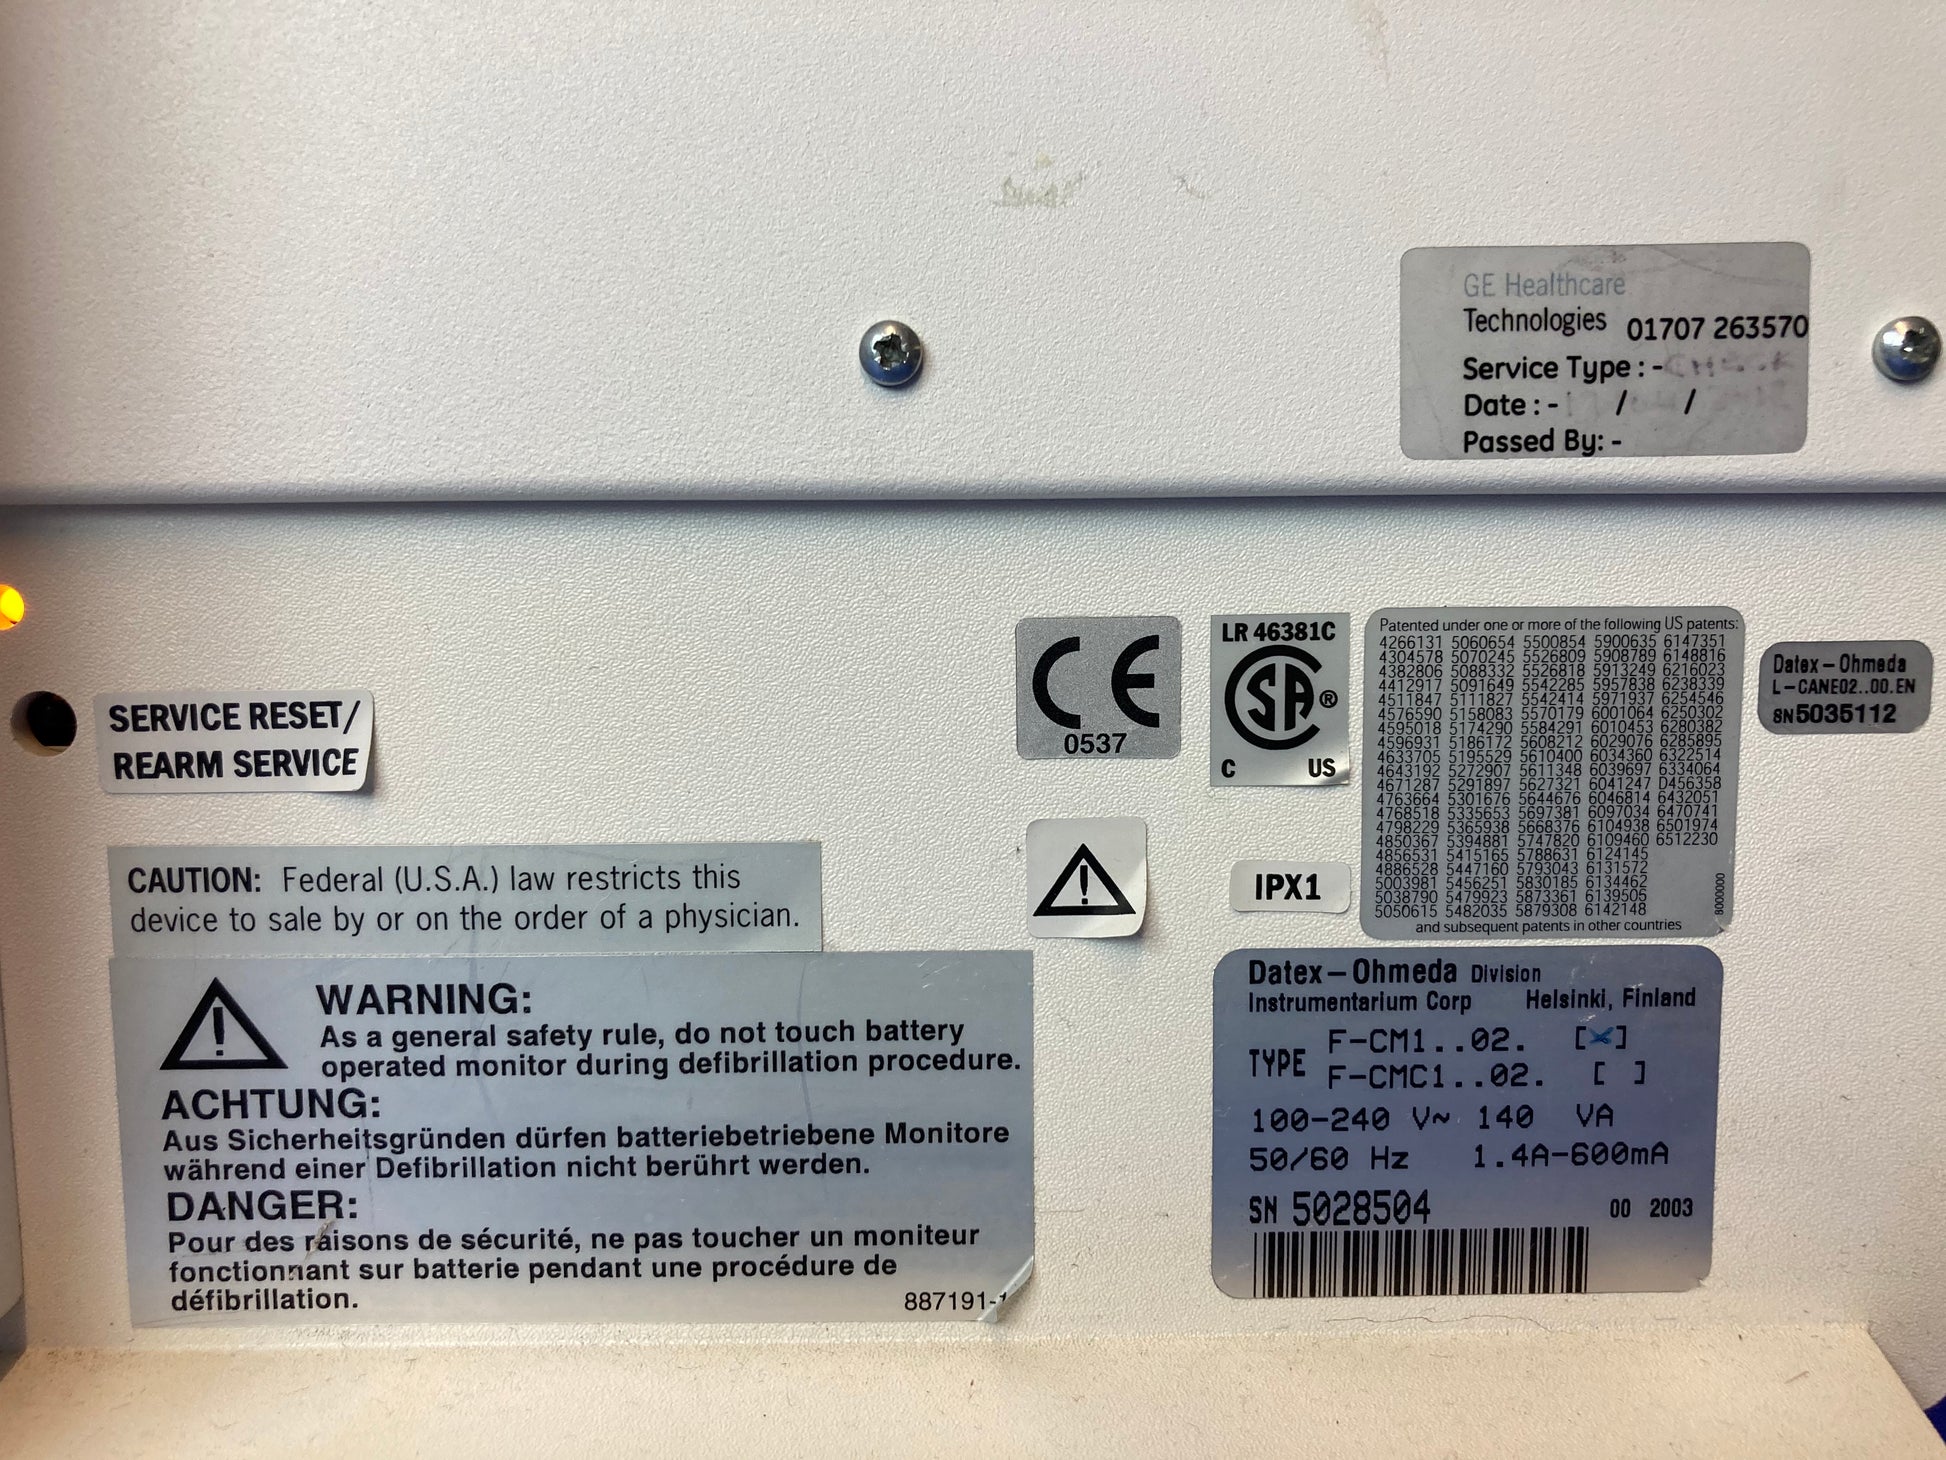 Rear side panel of the monitor shows its Specific Details